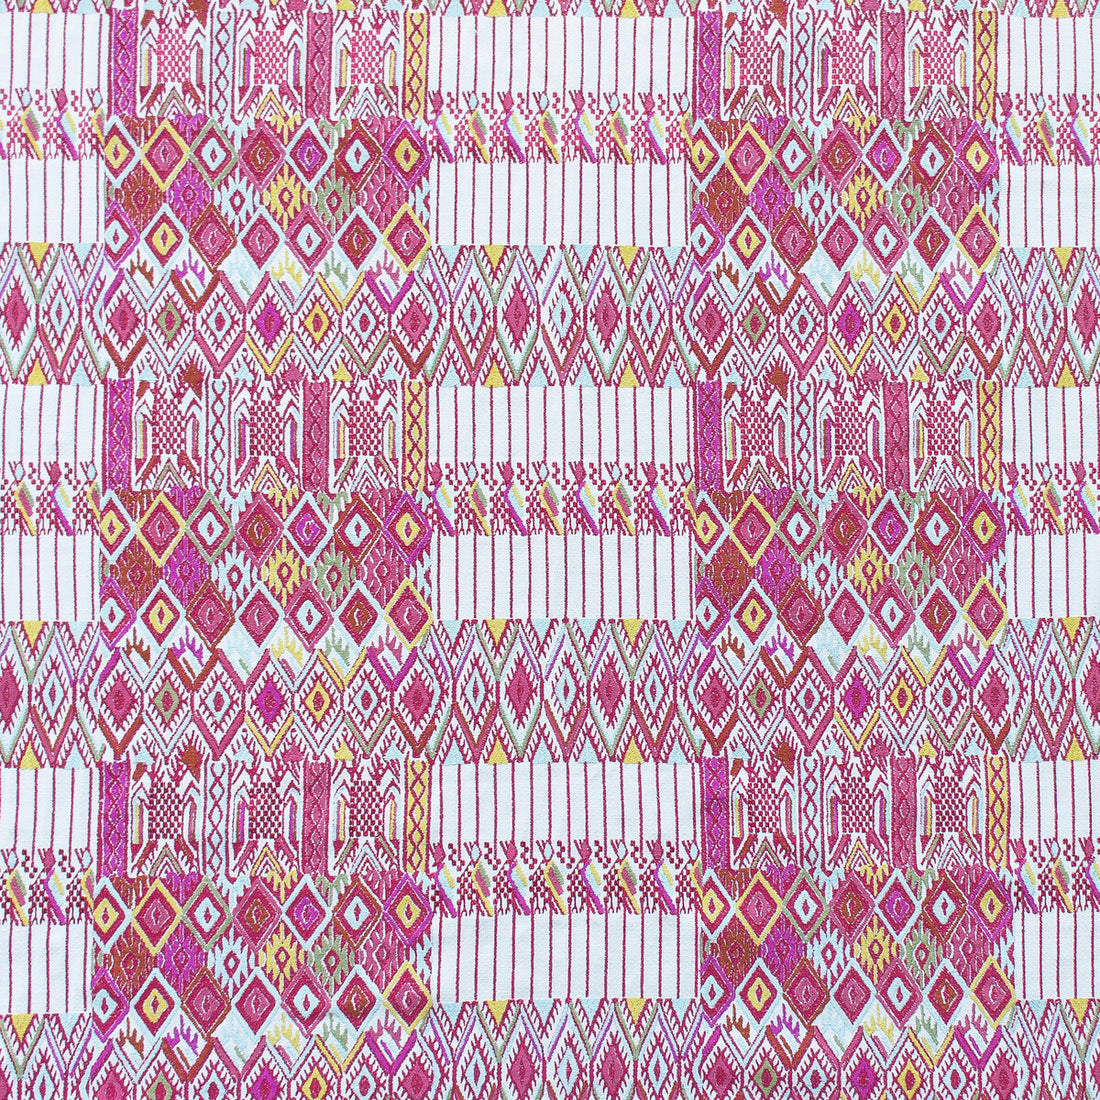 Huipil fabric in rosa/verde color - pattern GDT5564.001.0 - by Gaston y Daniela in the Gaston Nuevo Mundo collection